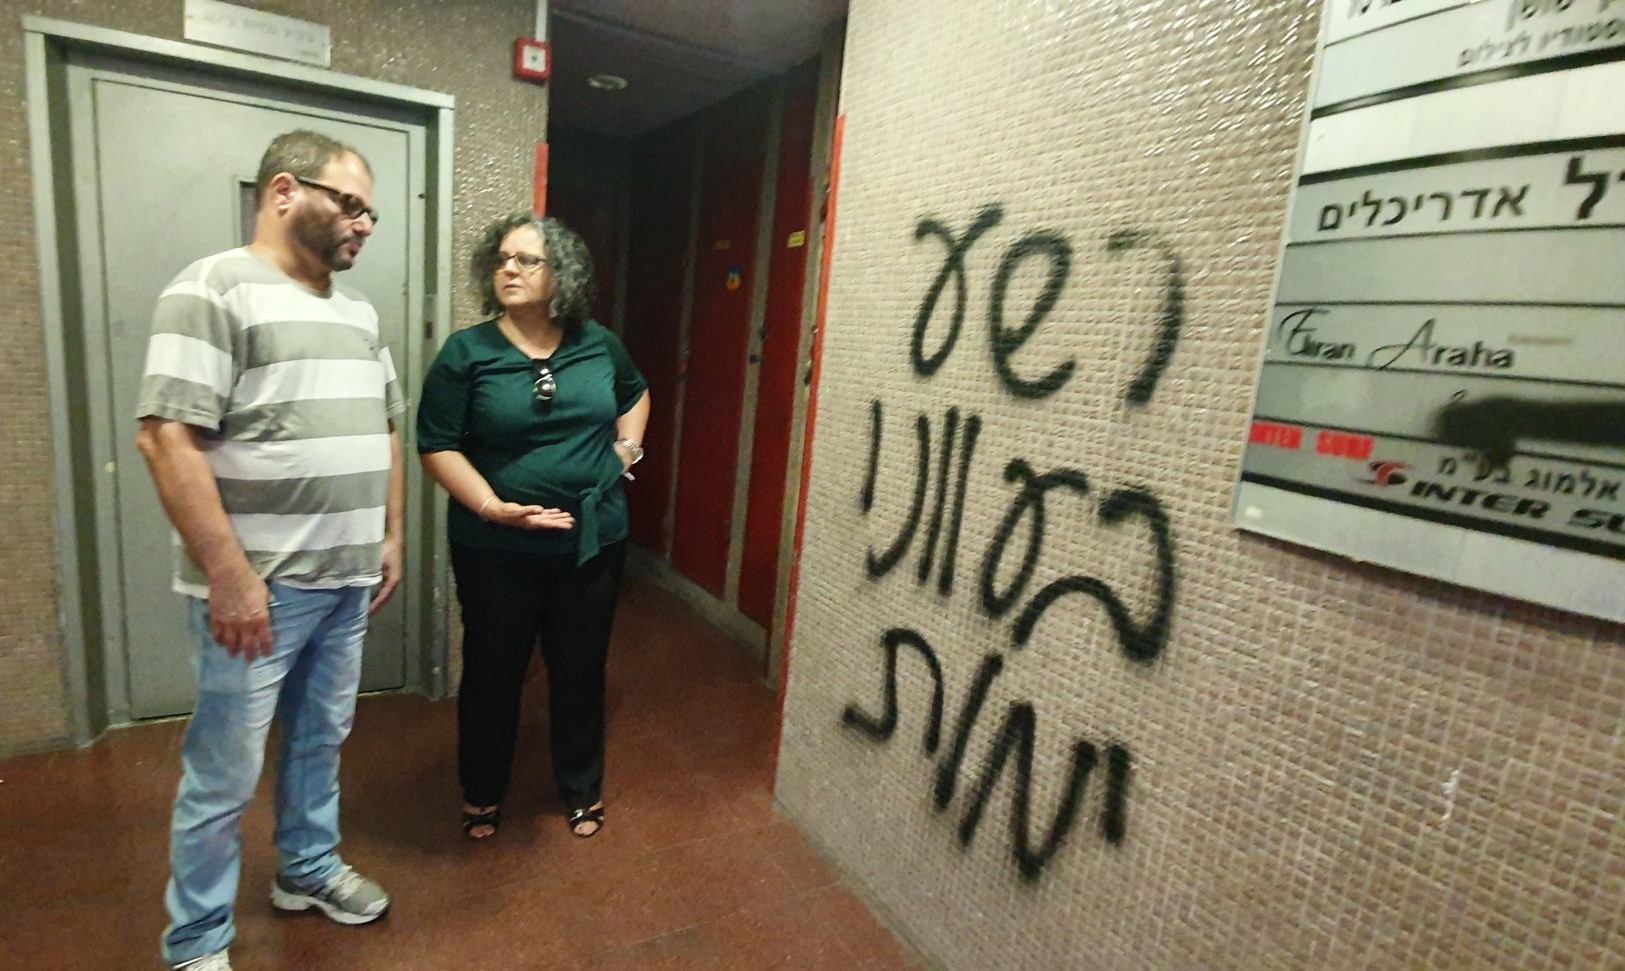 Hadash MKs Cassif and Touma-Sliman near the death threats sprayed in Tel Aviv outside the offices of Amnesty International; the Hebrew graffiti reads: "An evil one will die in his sin."